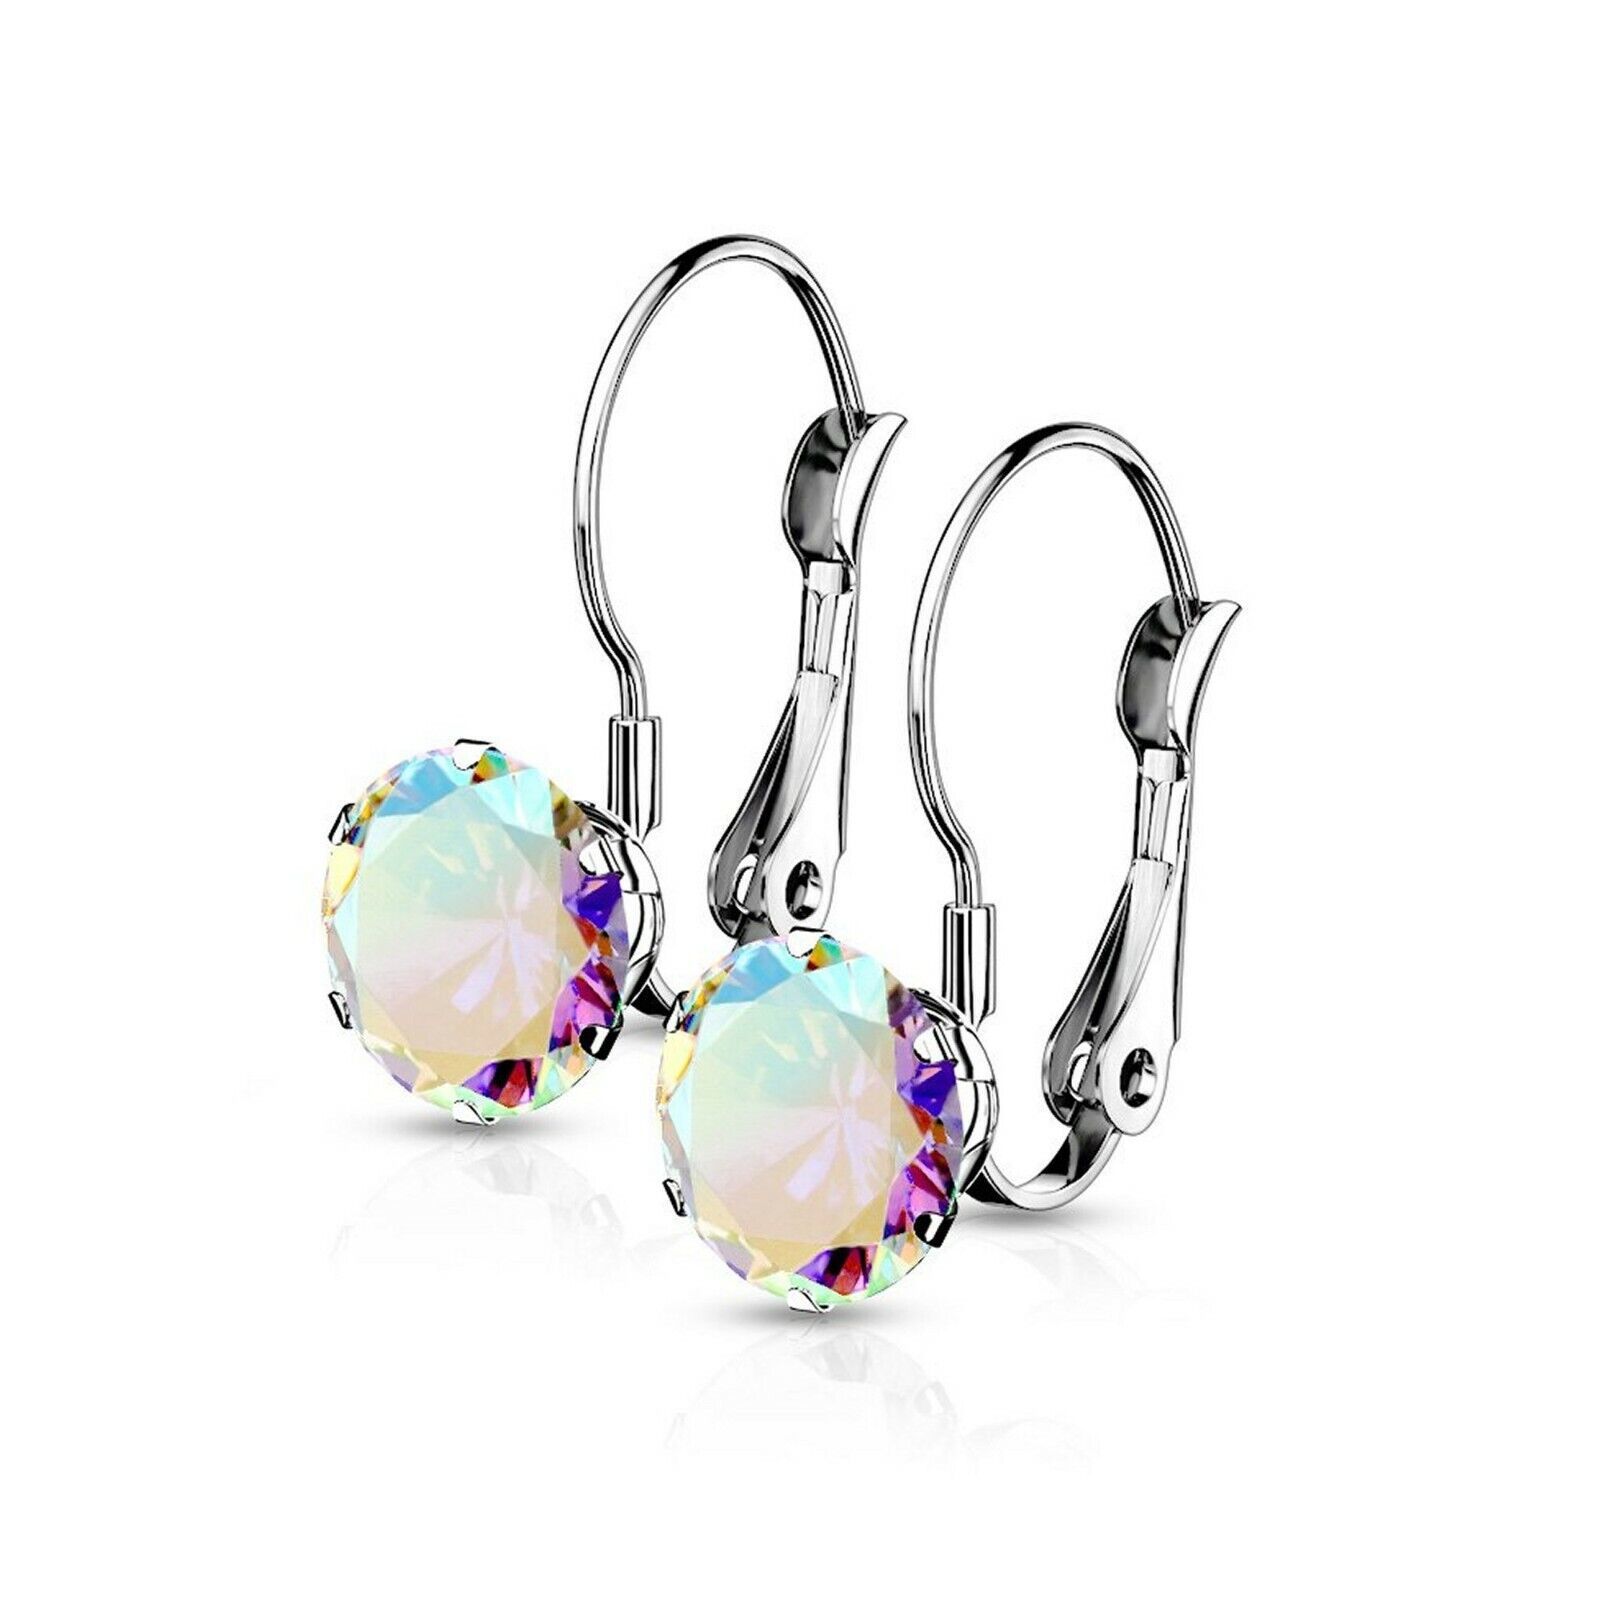 Primary image for Rainbow Cubic Zirconia Crystal Drop Earrings Leverback Silver Stainless Steel